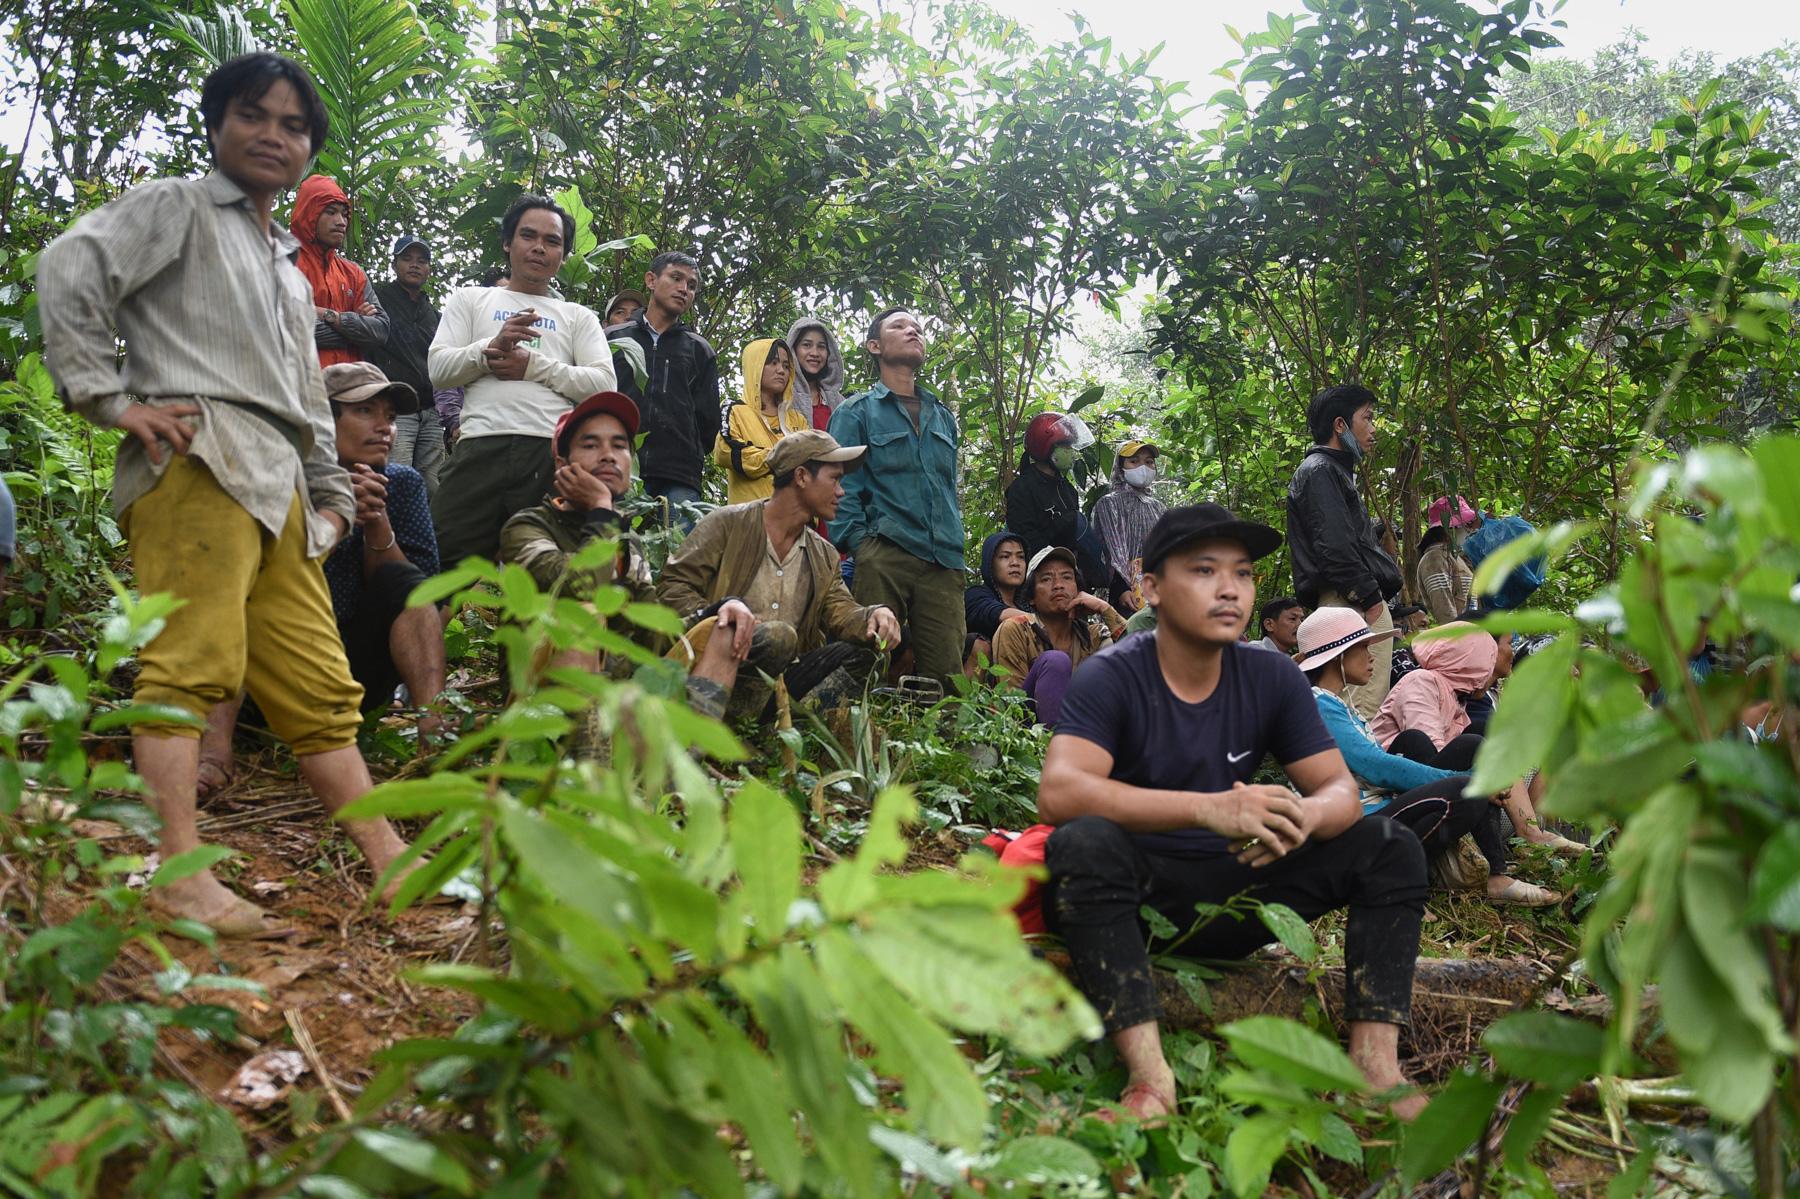 A month with full of sorrow - Residents wait for a rescue team to find missing people...